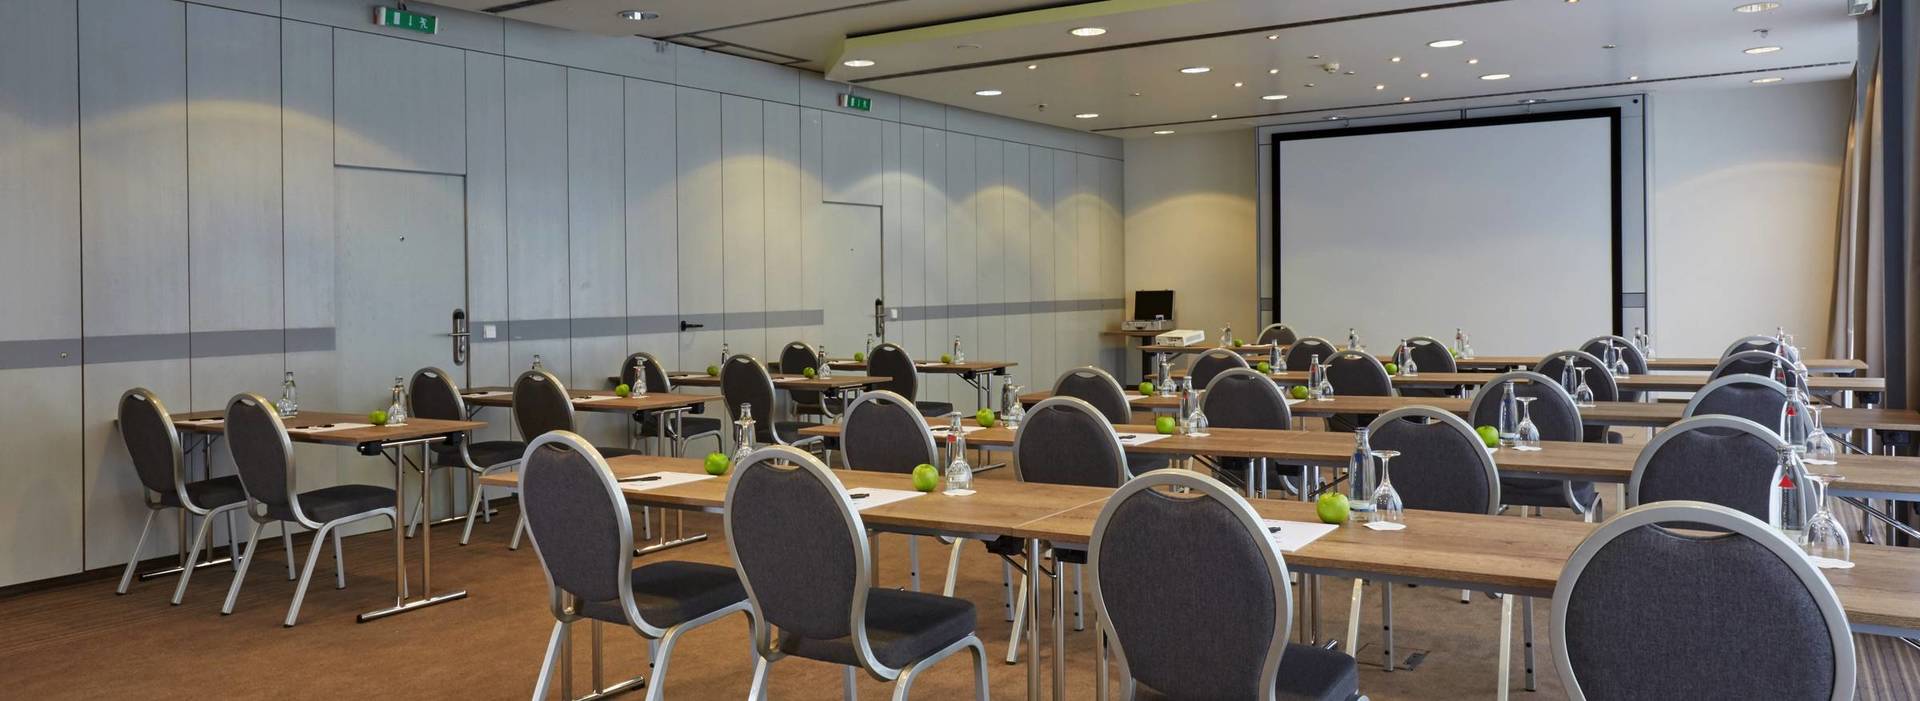 Modern, fully equipped rooms to suit every purpose - H+ Hotel Stuttgart Herrenberg - Official website